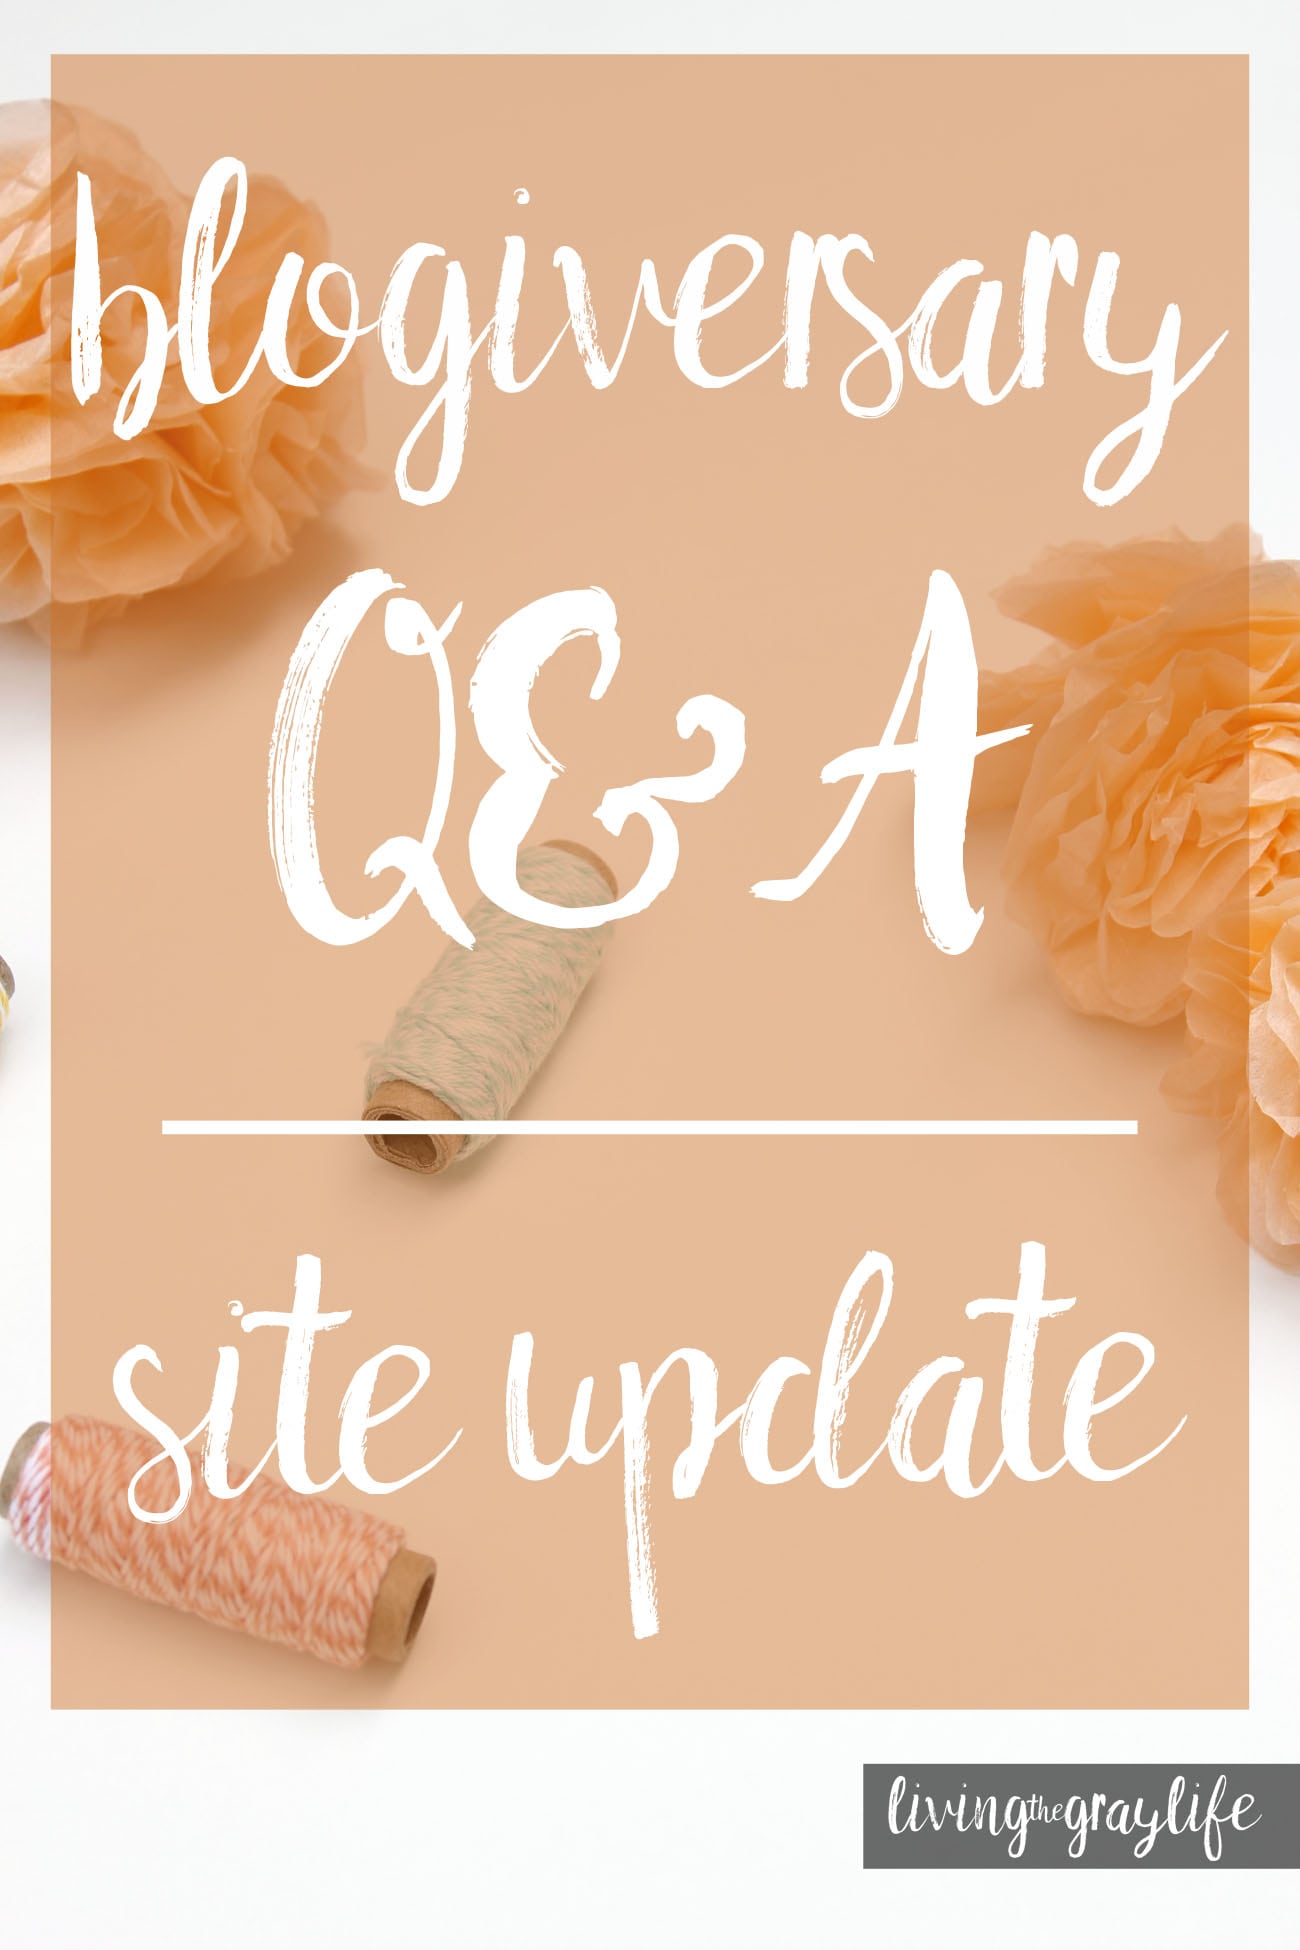 blogiversary Q&A and site update